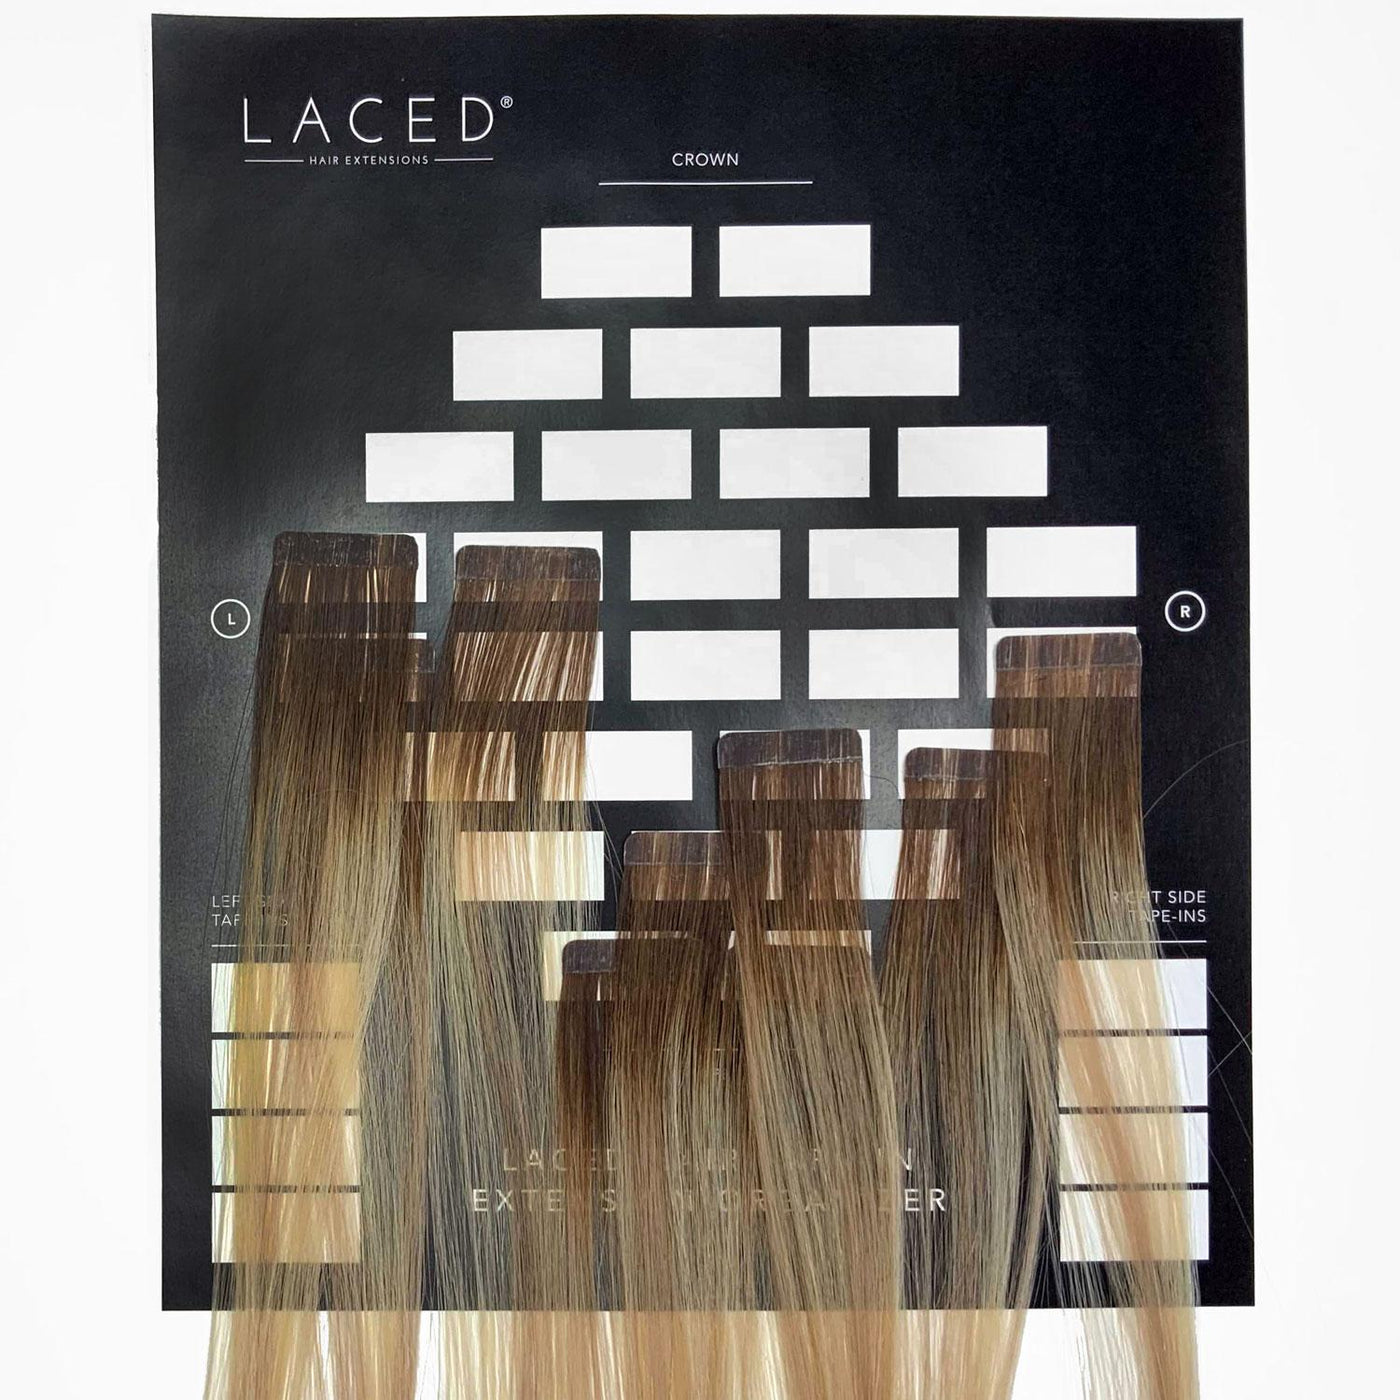 Laced Hair Tape-In Extension Organizer